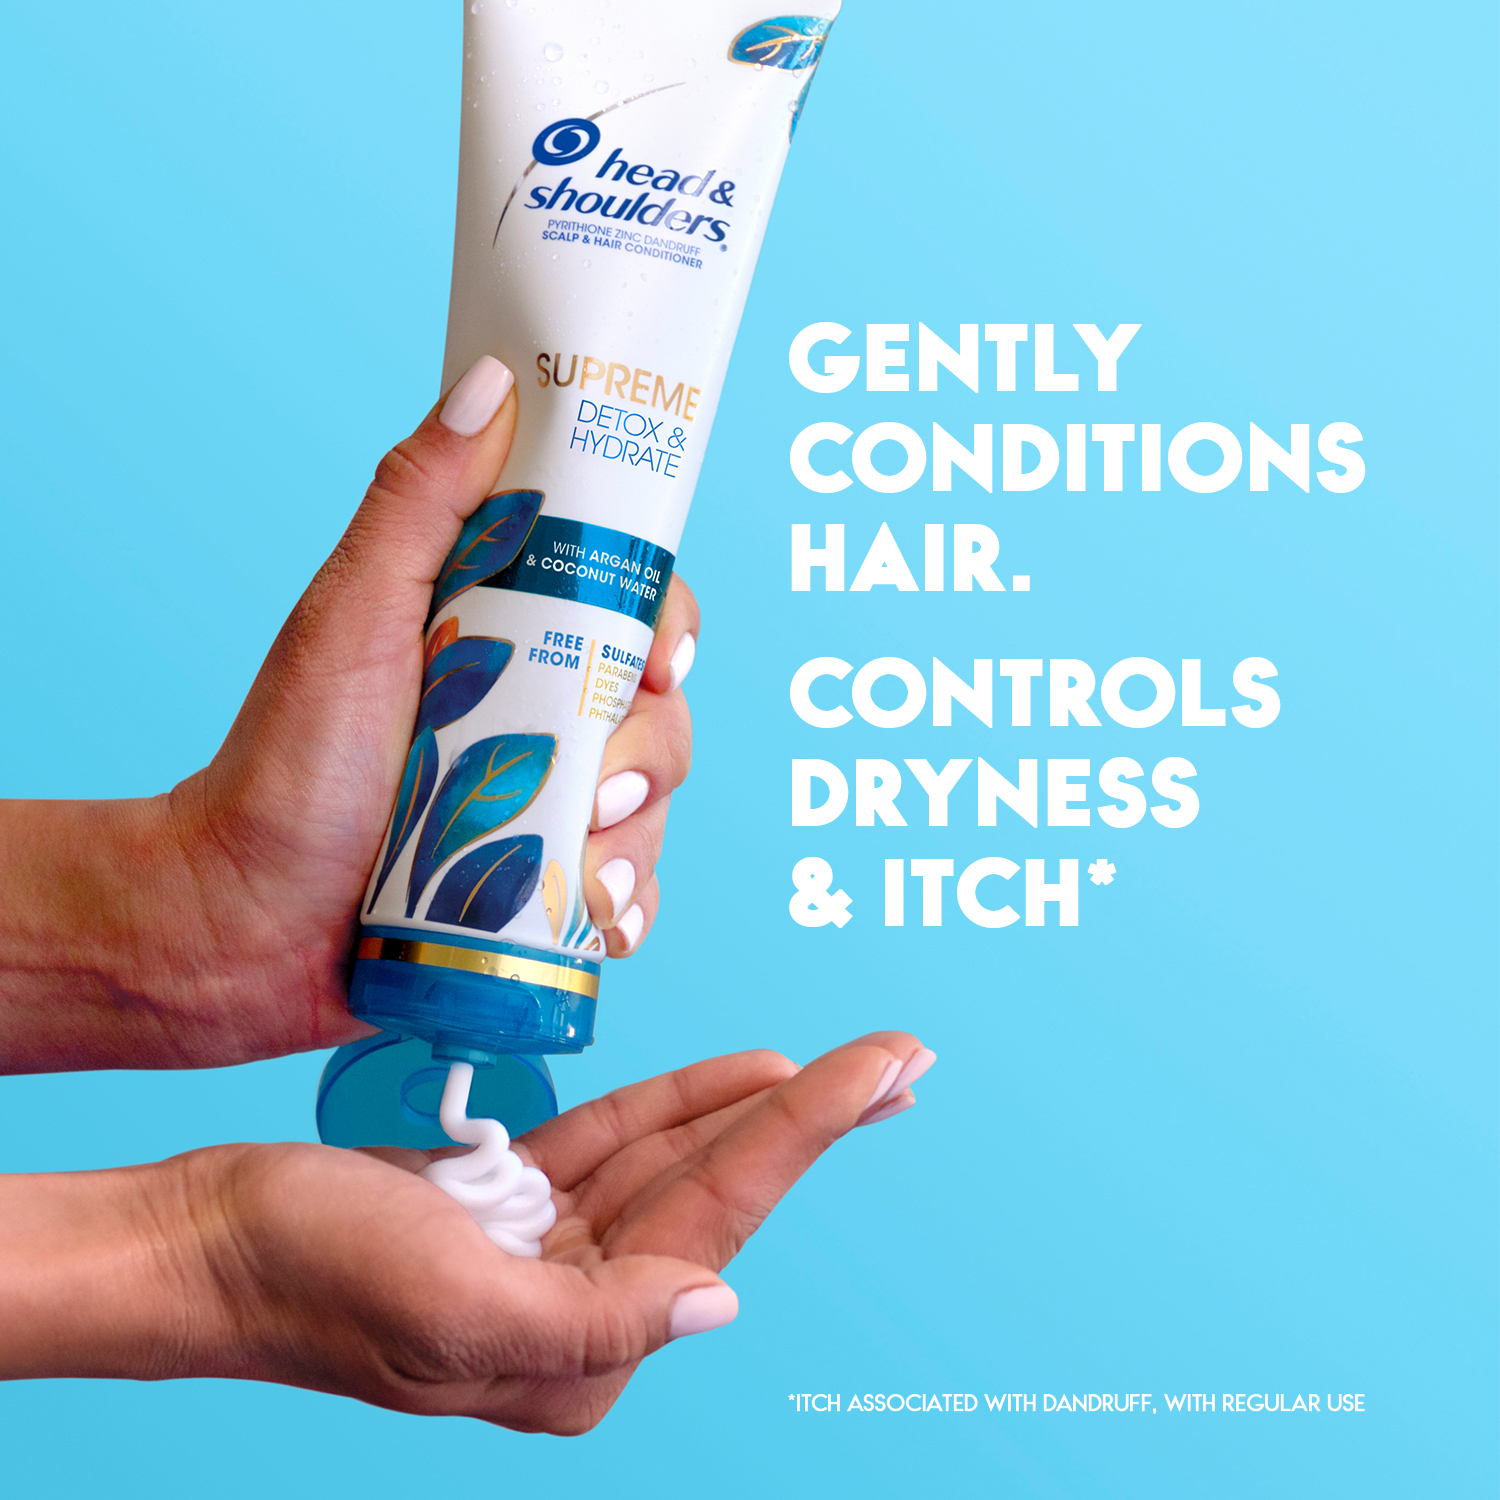 Head & Shoulders Supreme Conditioner, Detox and Hydrate, for All Hair Types, 9.4 fl oz - image 4 of 10